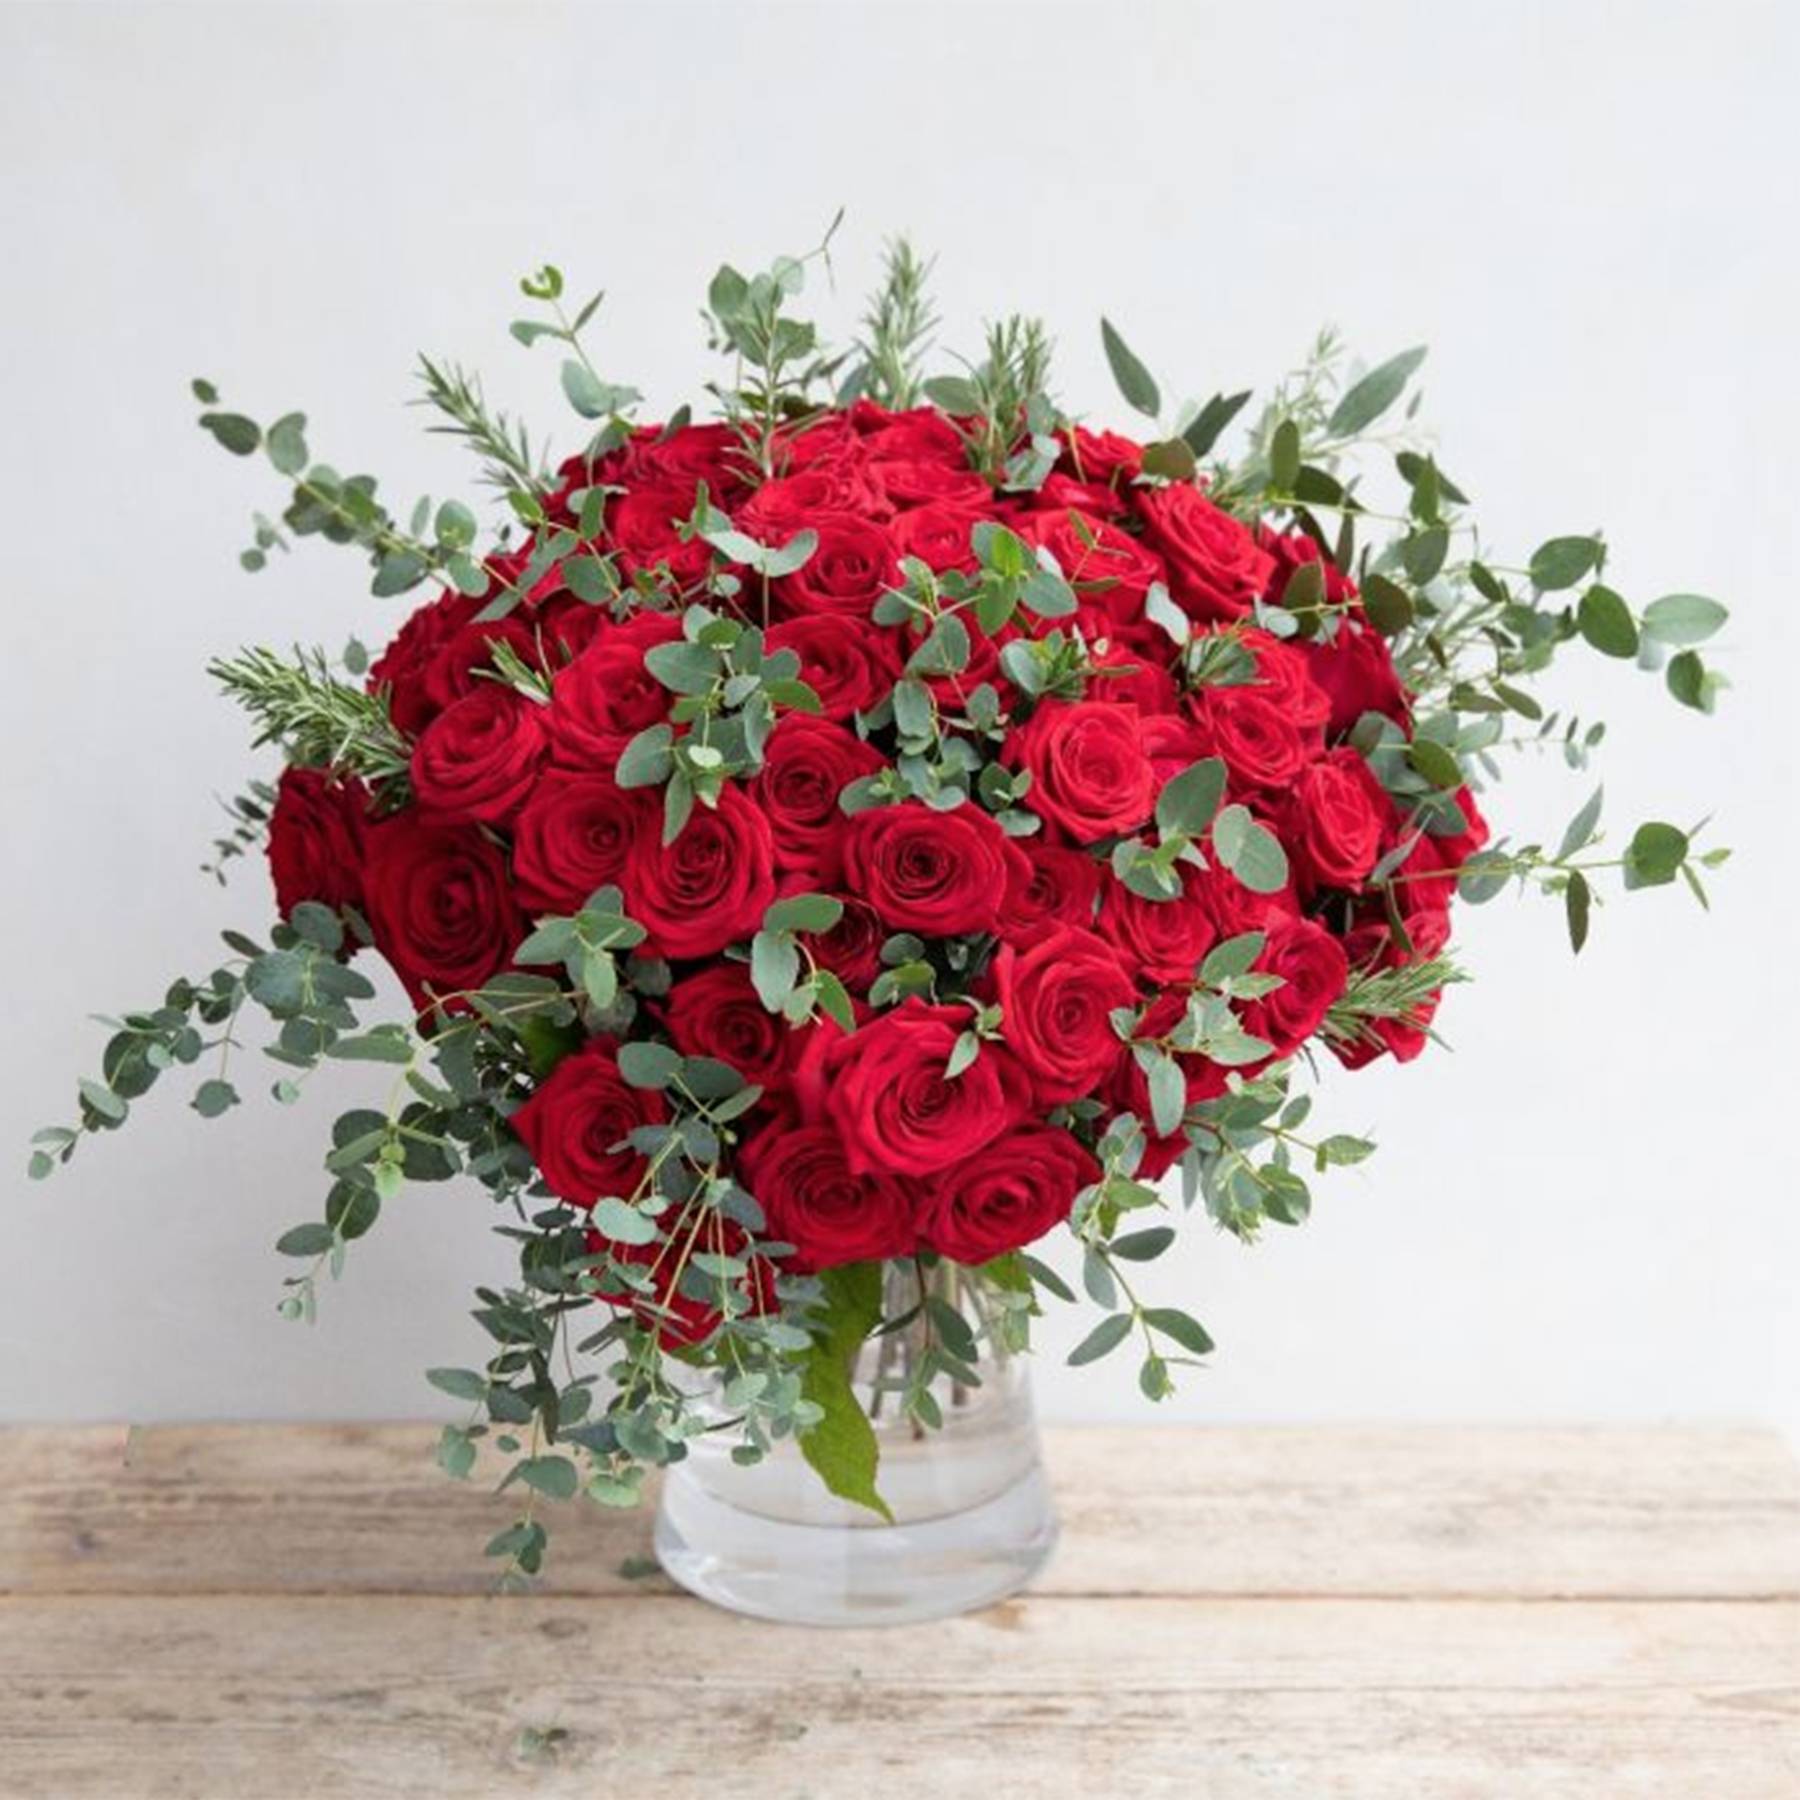 23 Best Flower Delivery Services 2021: UK Next-Day Flower Delivery